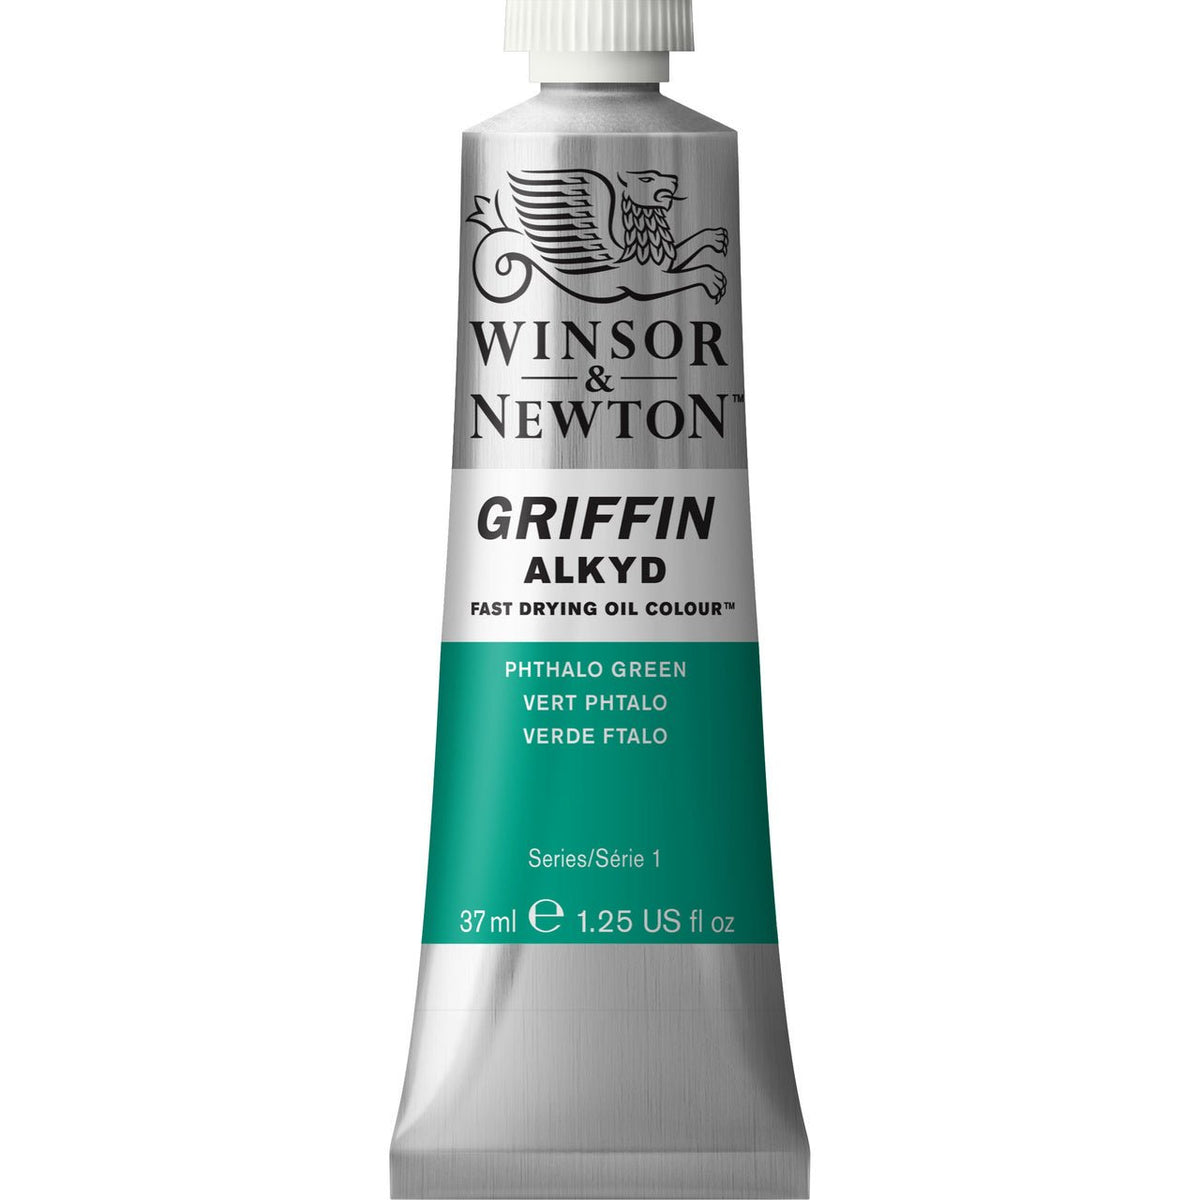 Winsor & Newton Griffin Alkyd 37ml Phthalo Green - merriartist.com